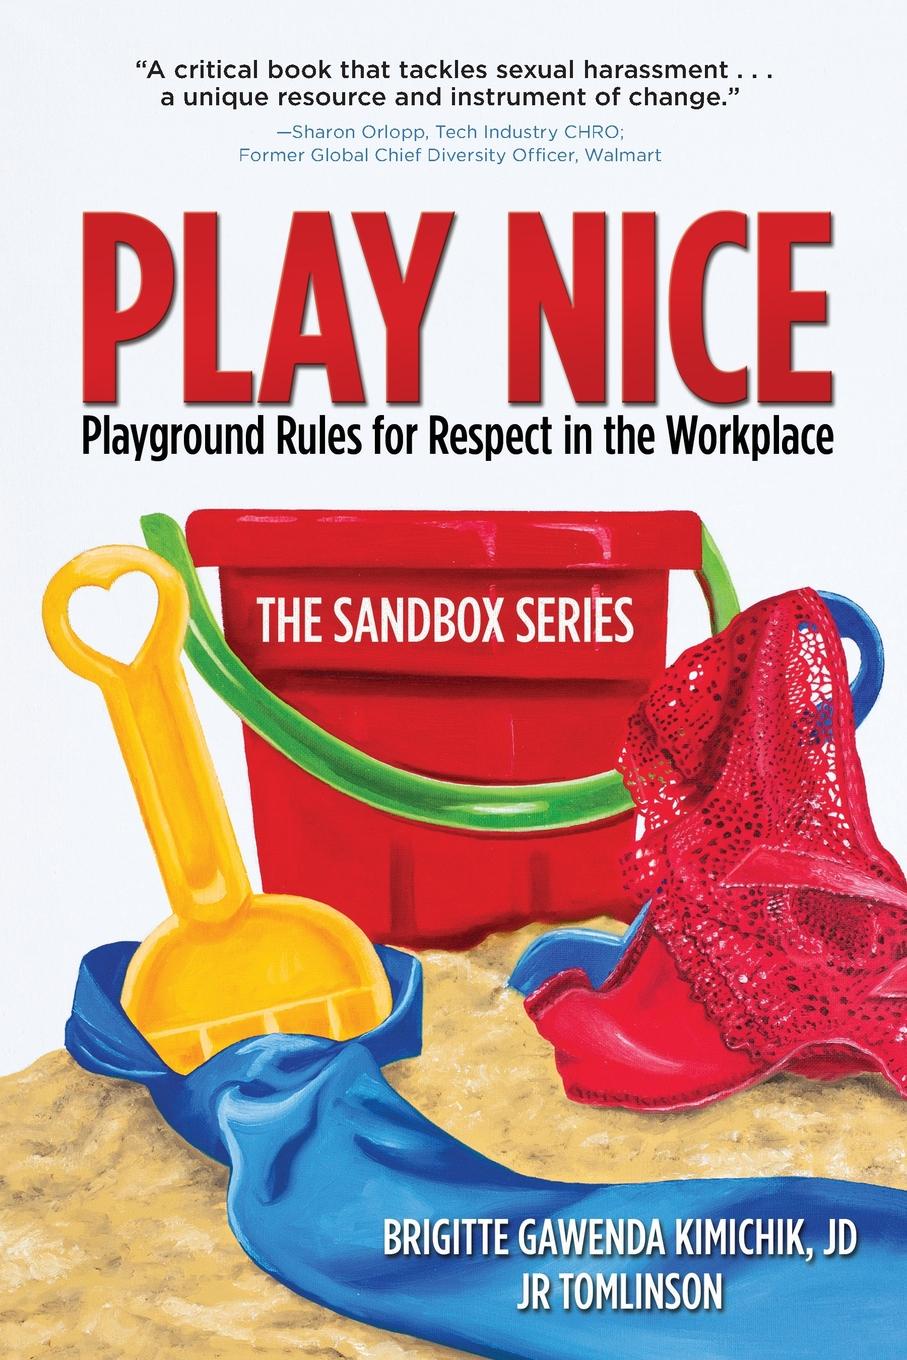 Play Nice. Playground Rules for Respect in the Workplace